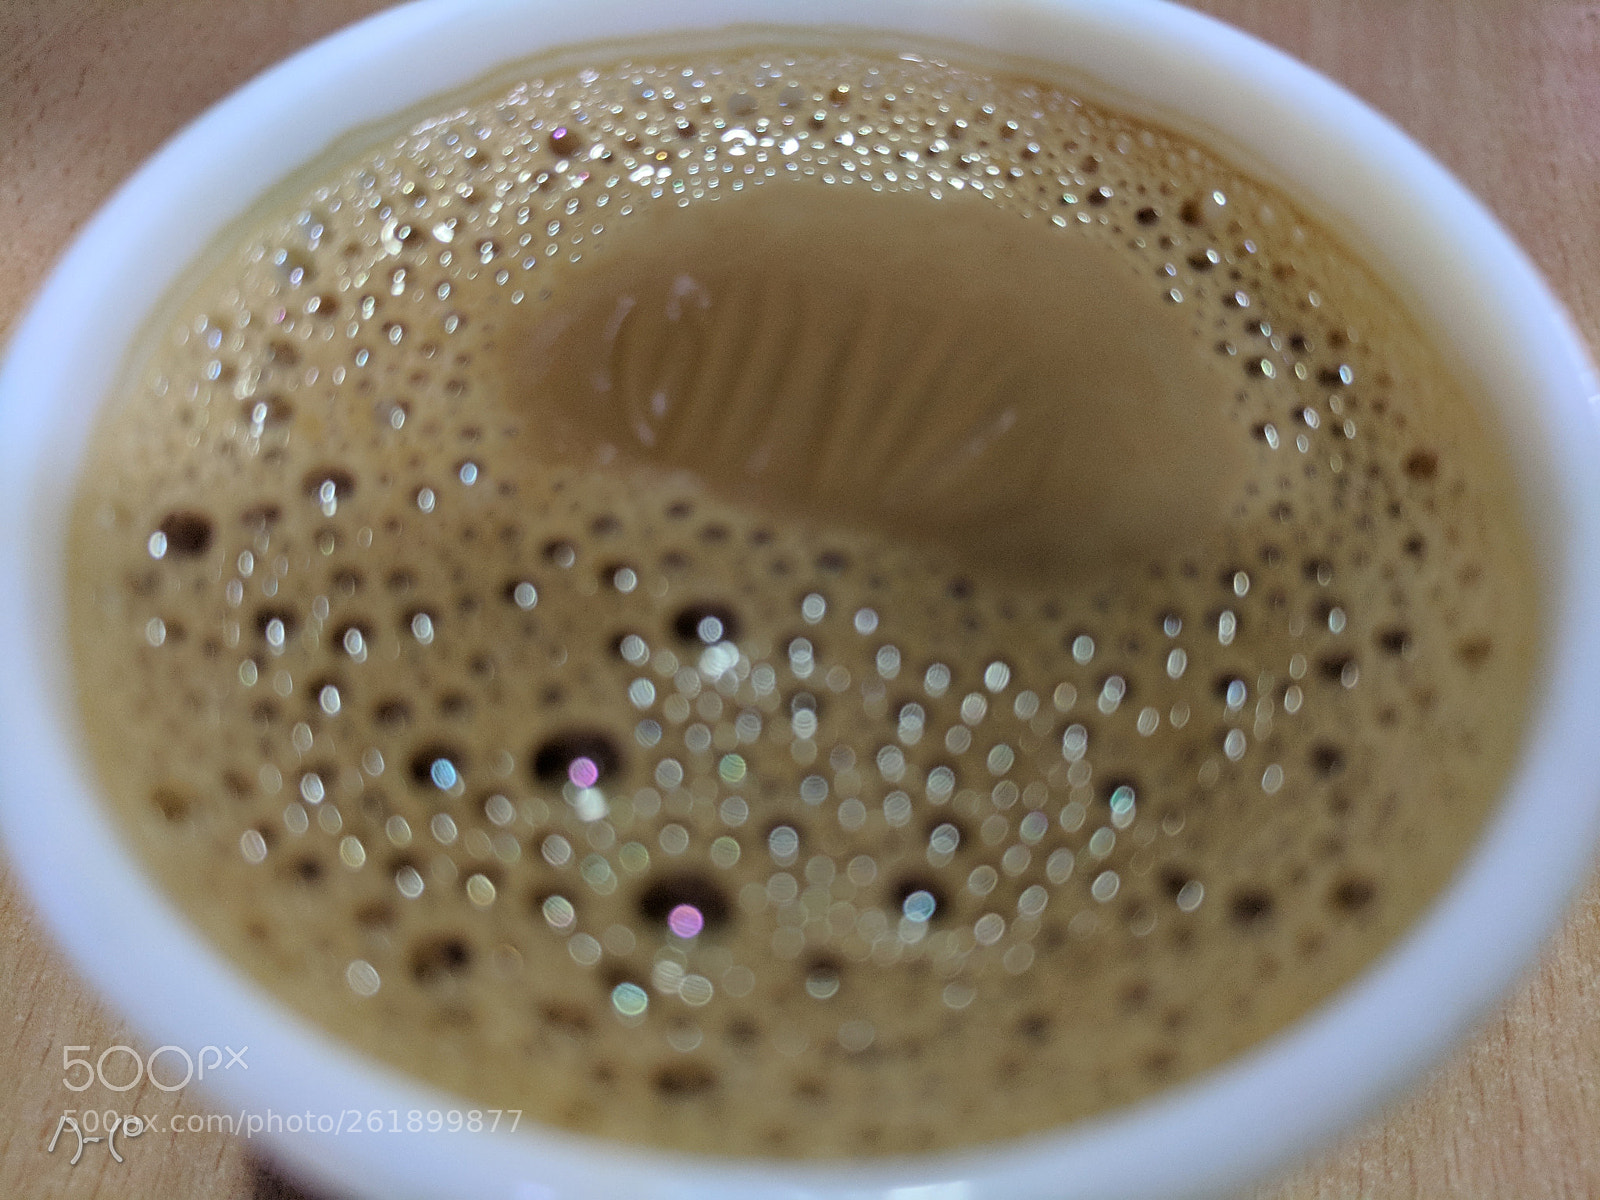 Google Pixel XL sample photo. Colorful bubbles on coffee photography